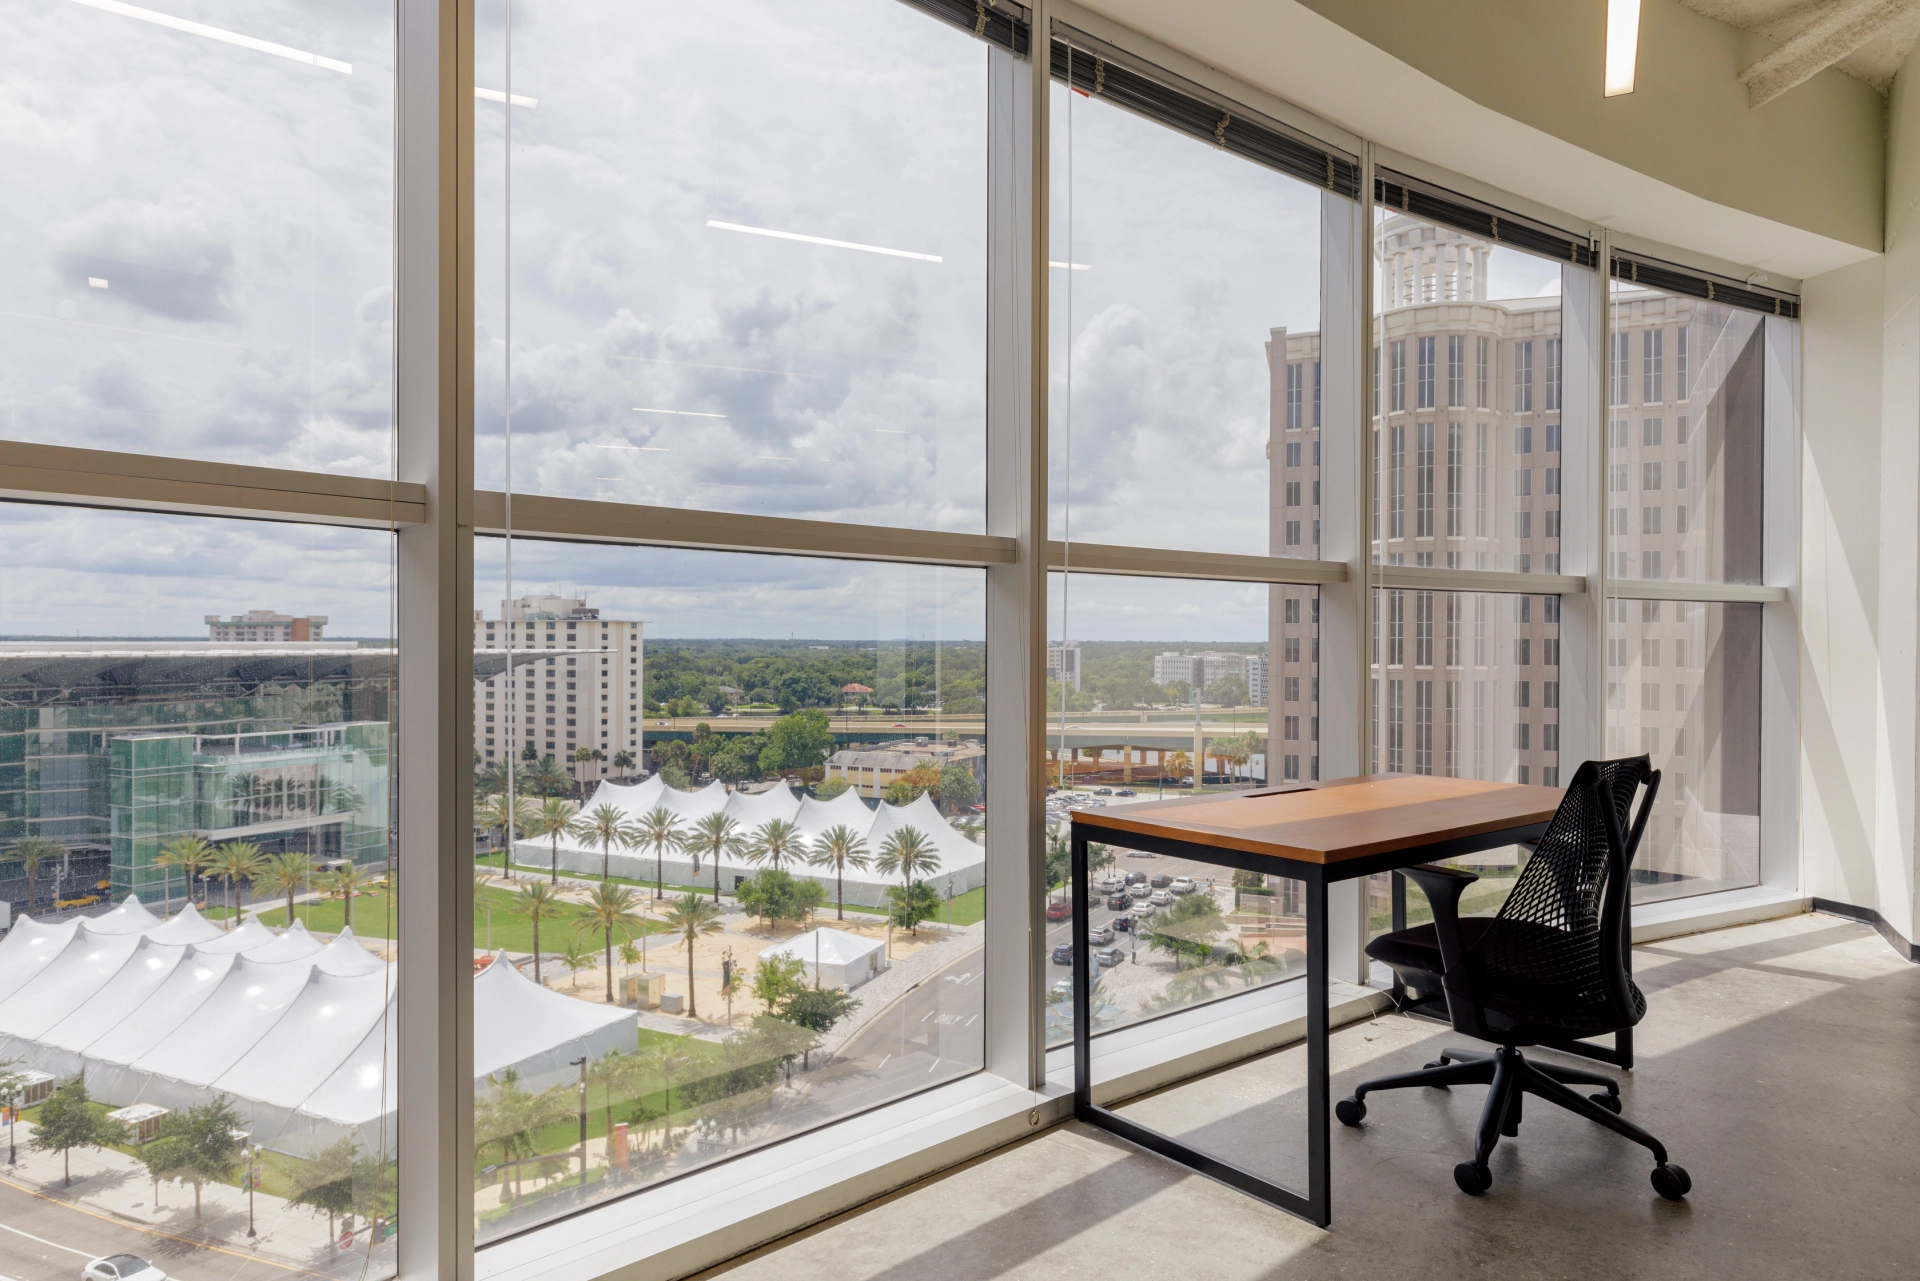 A meeting room in Orlando with a large window overlooking the city.